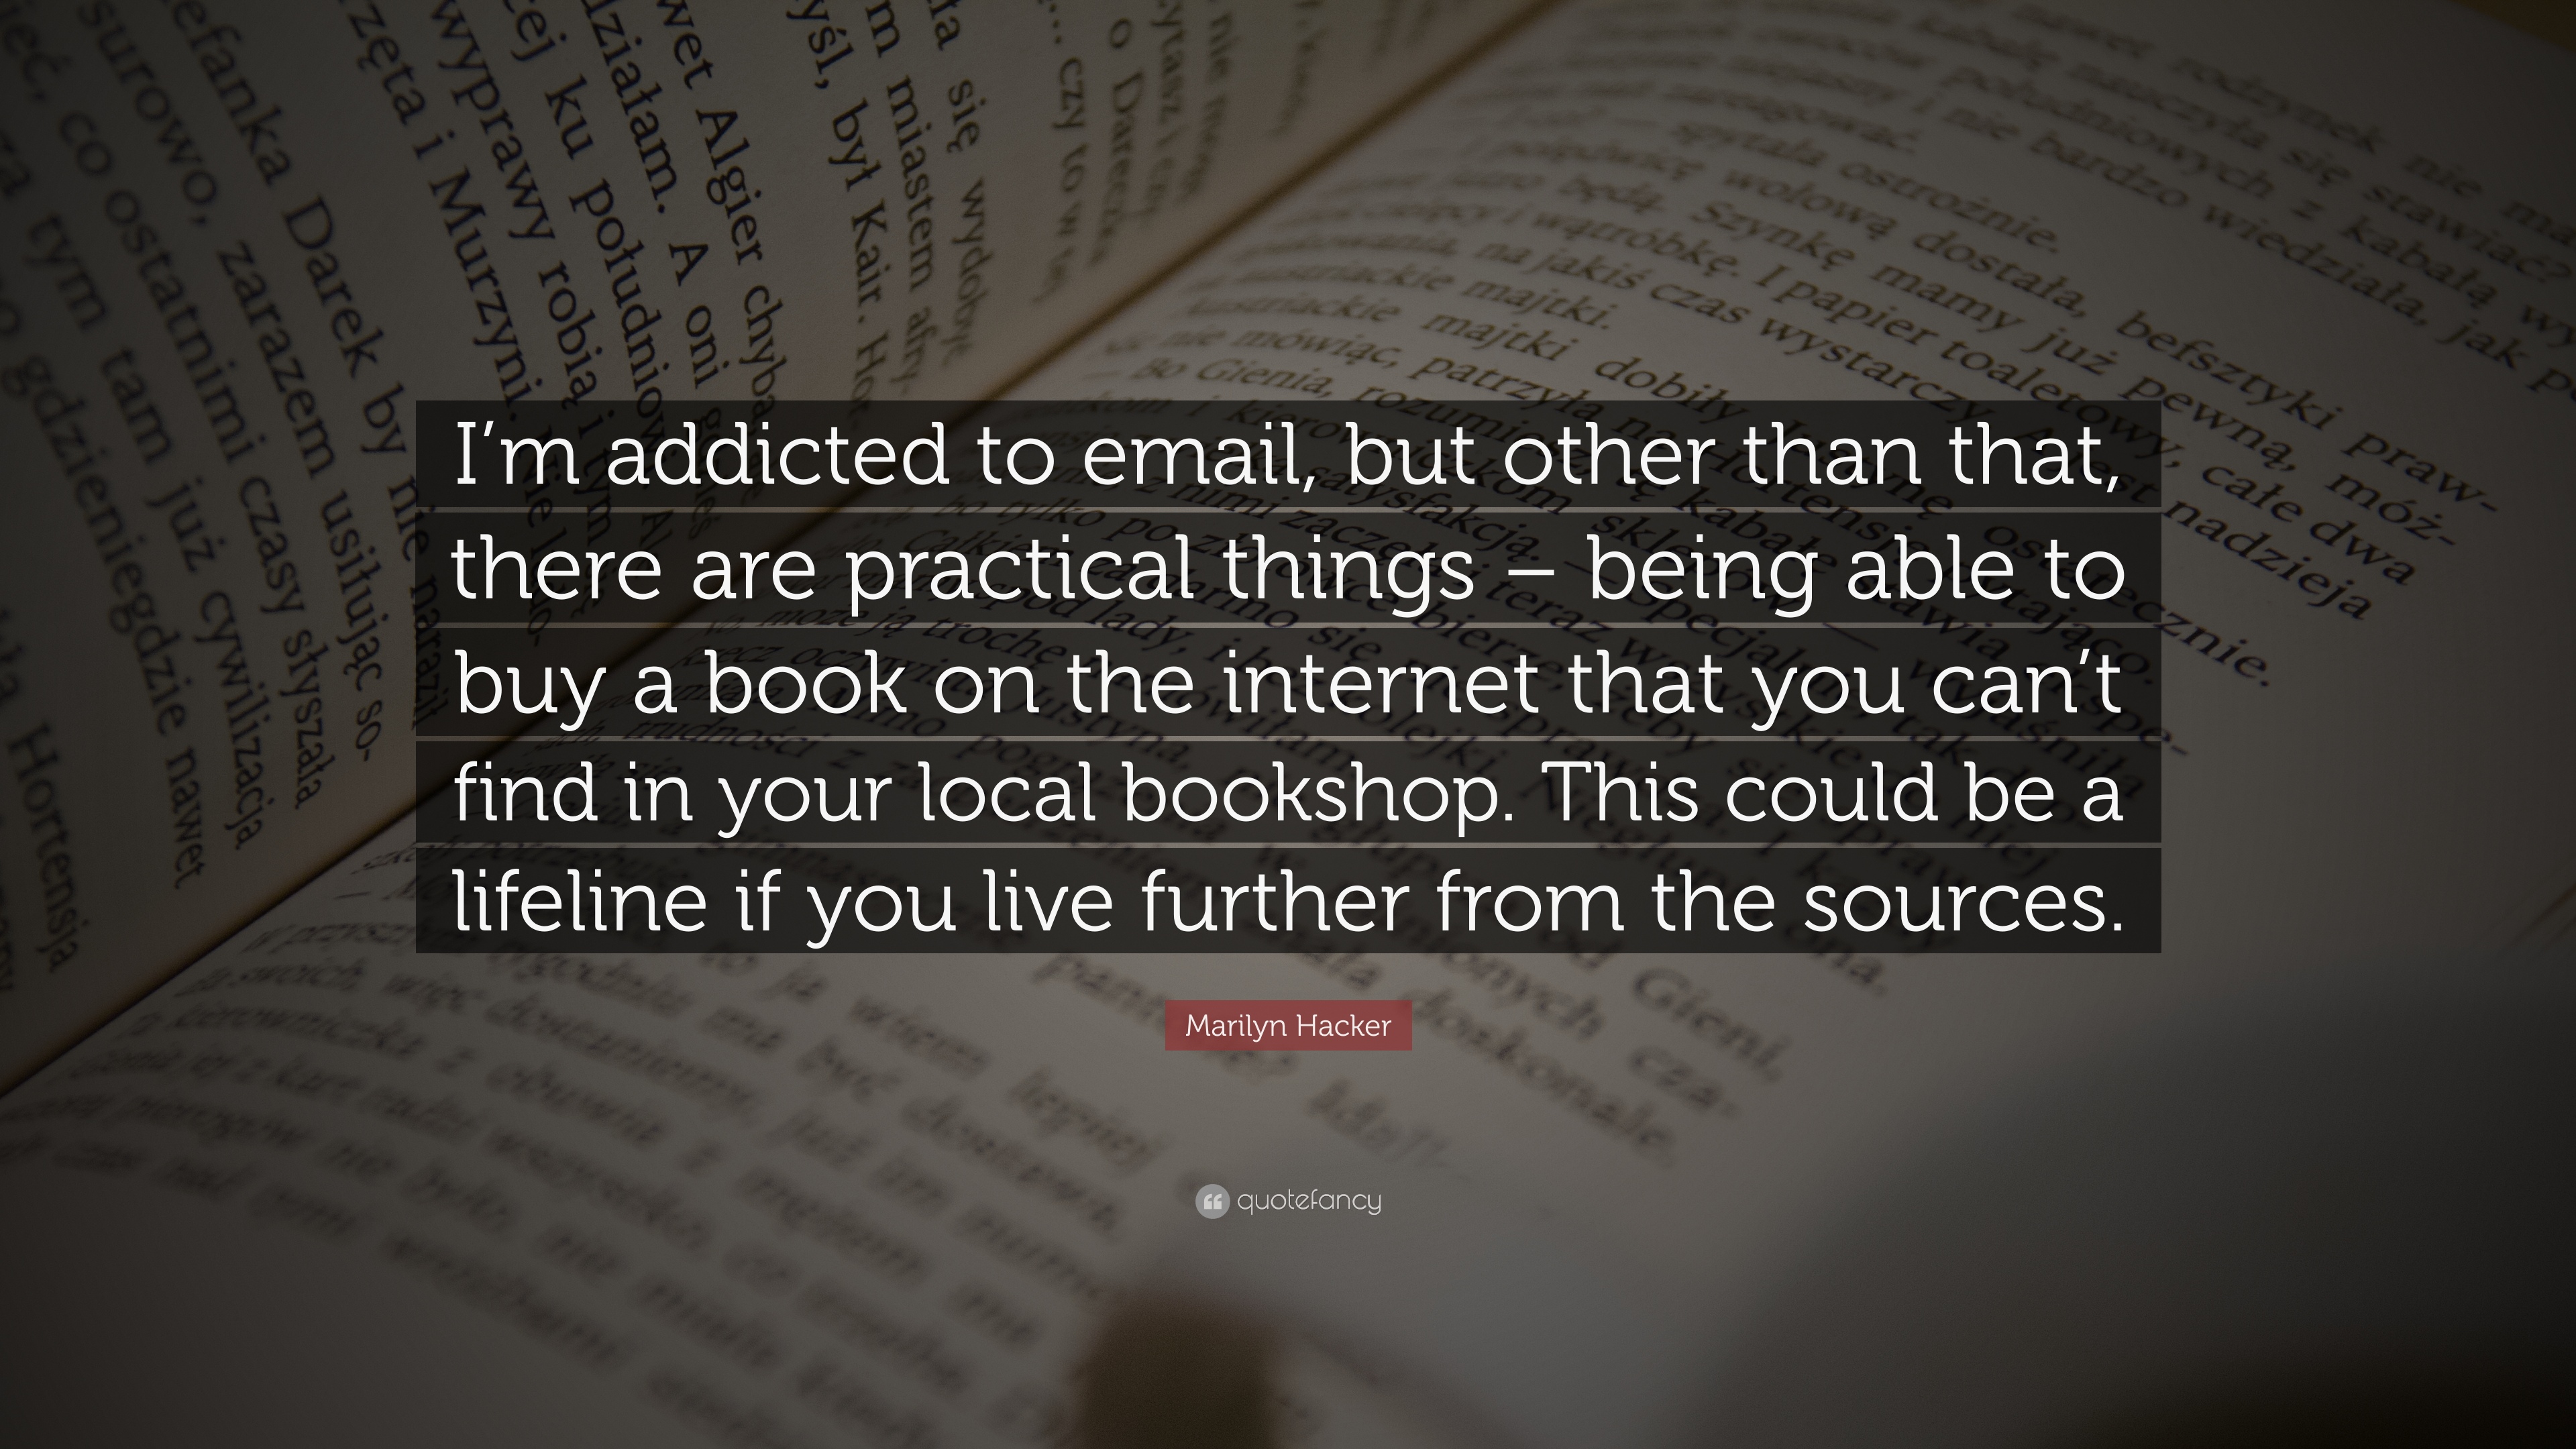 Marilyn Hacker Quote: “I'm addicted to email, but other than that, there are practical things